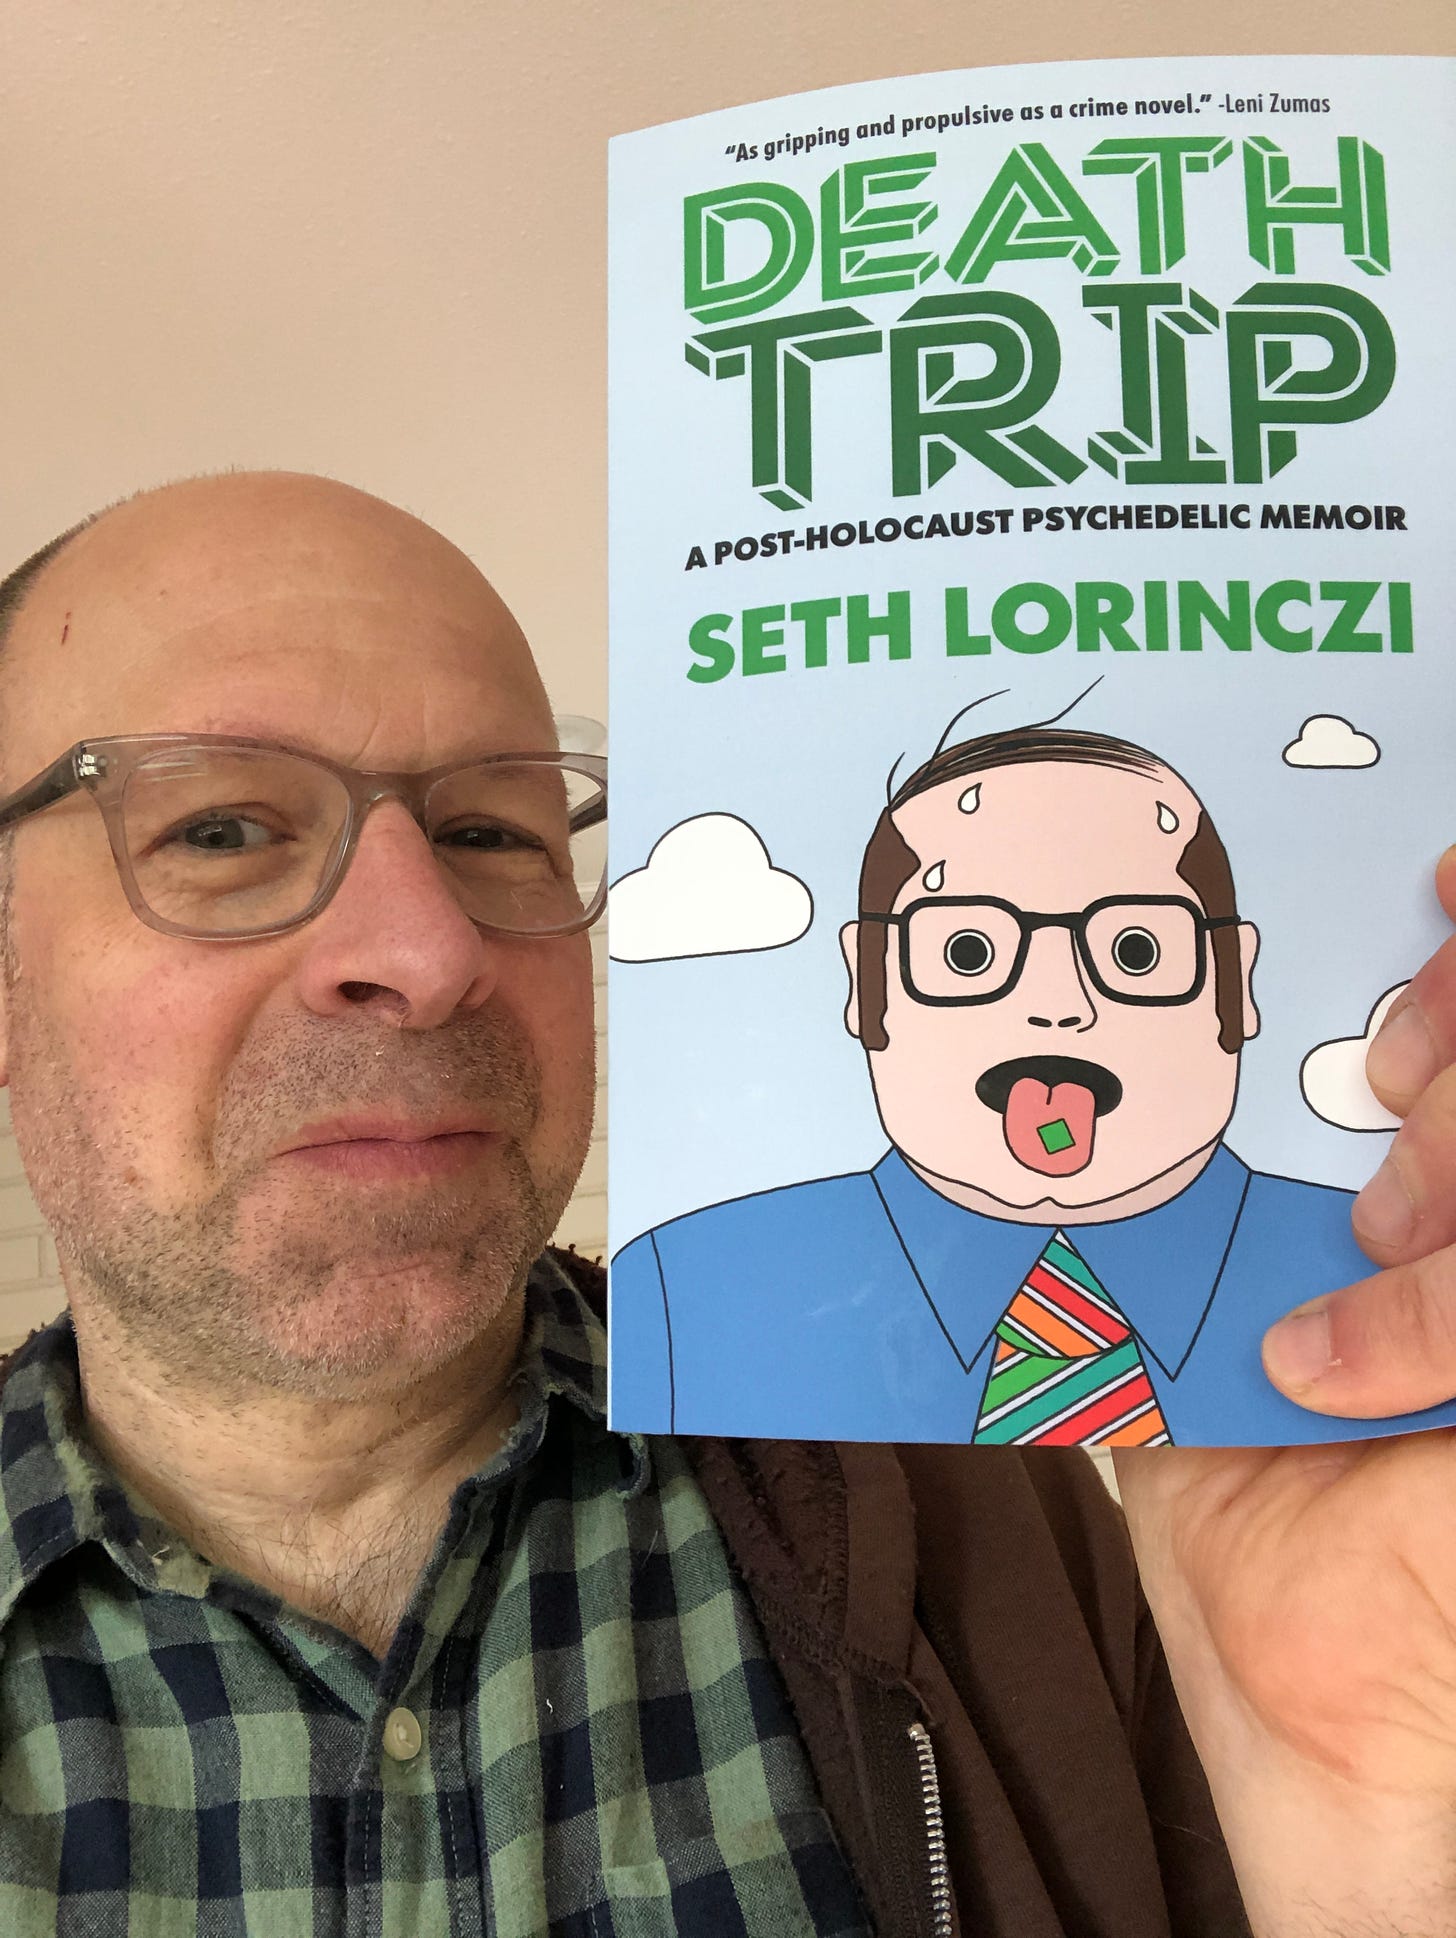 Author Seth Lorinczi with a copy of his book "Death Trip."